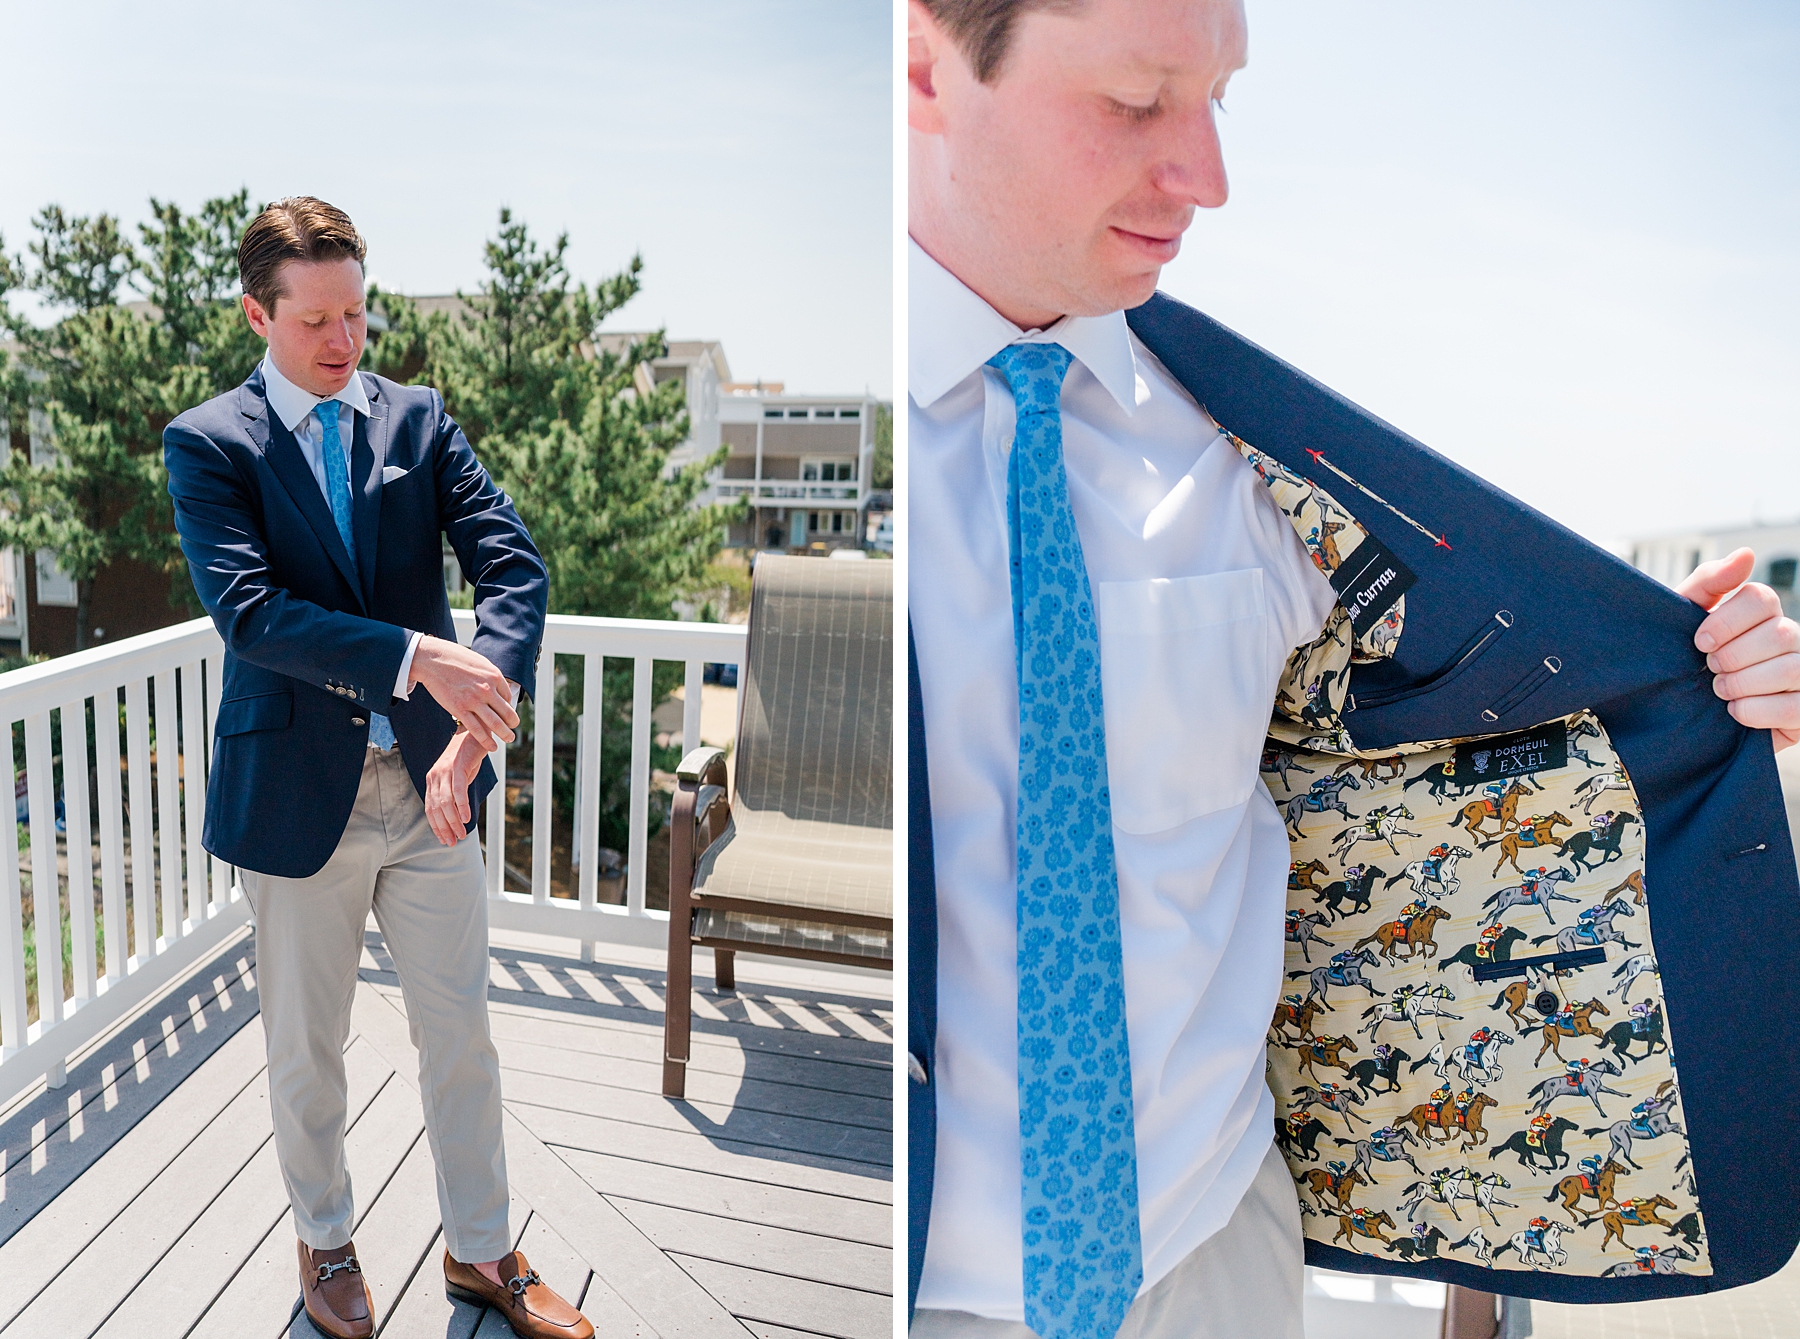 groom getting ready showing off the inside of his jacket featuring horses